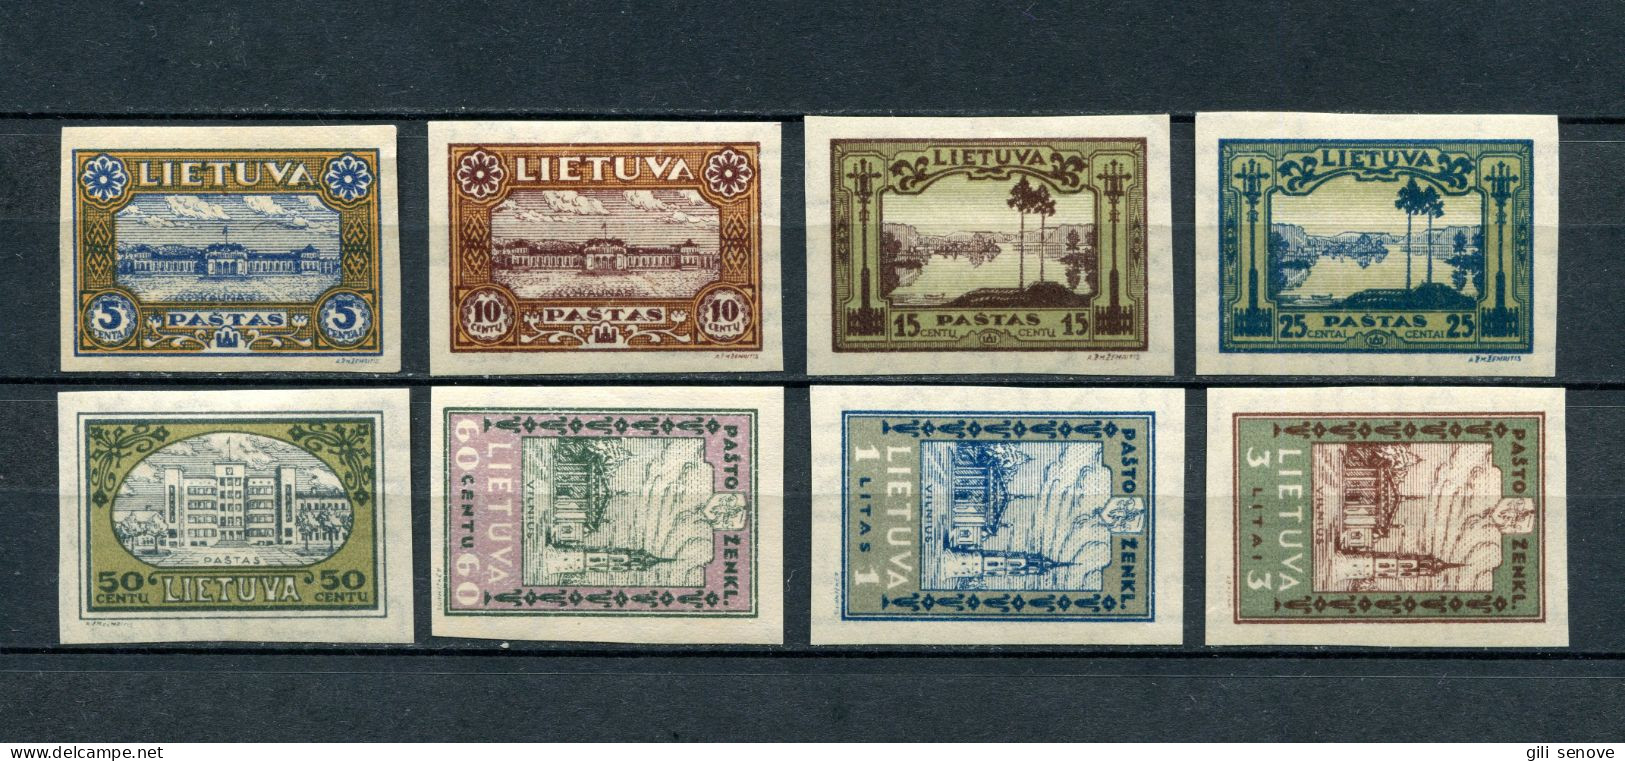 Lithuania 1932 Mi. 316B-323B Sc 256a –263a Lithuanian Scenes Imperforated MH* - Lituanie